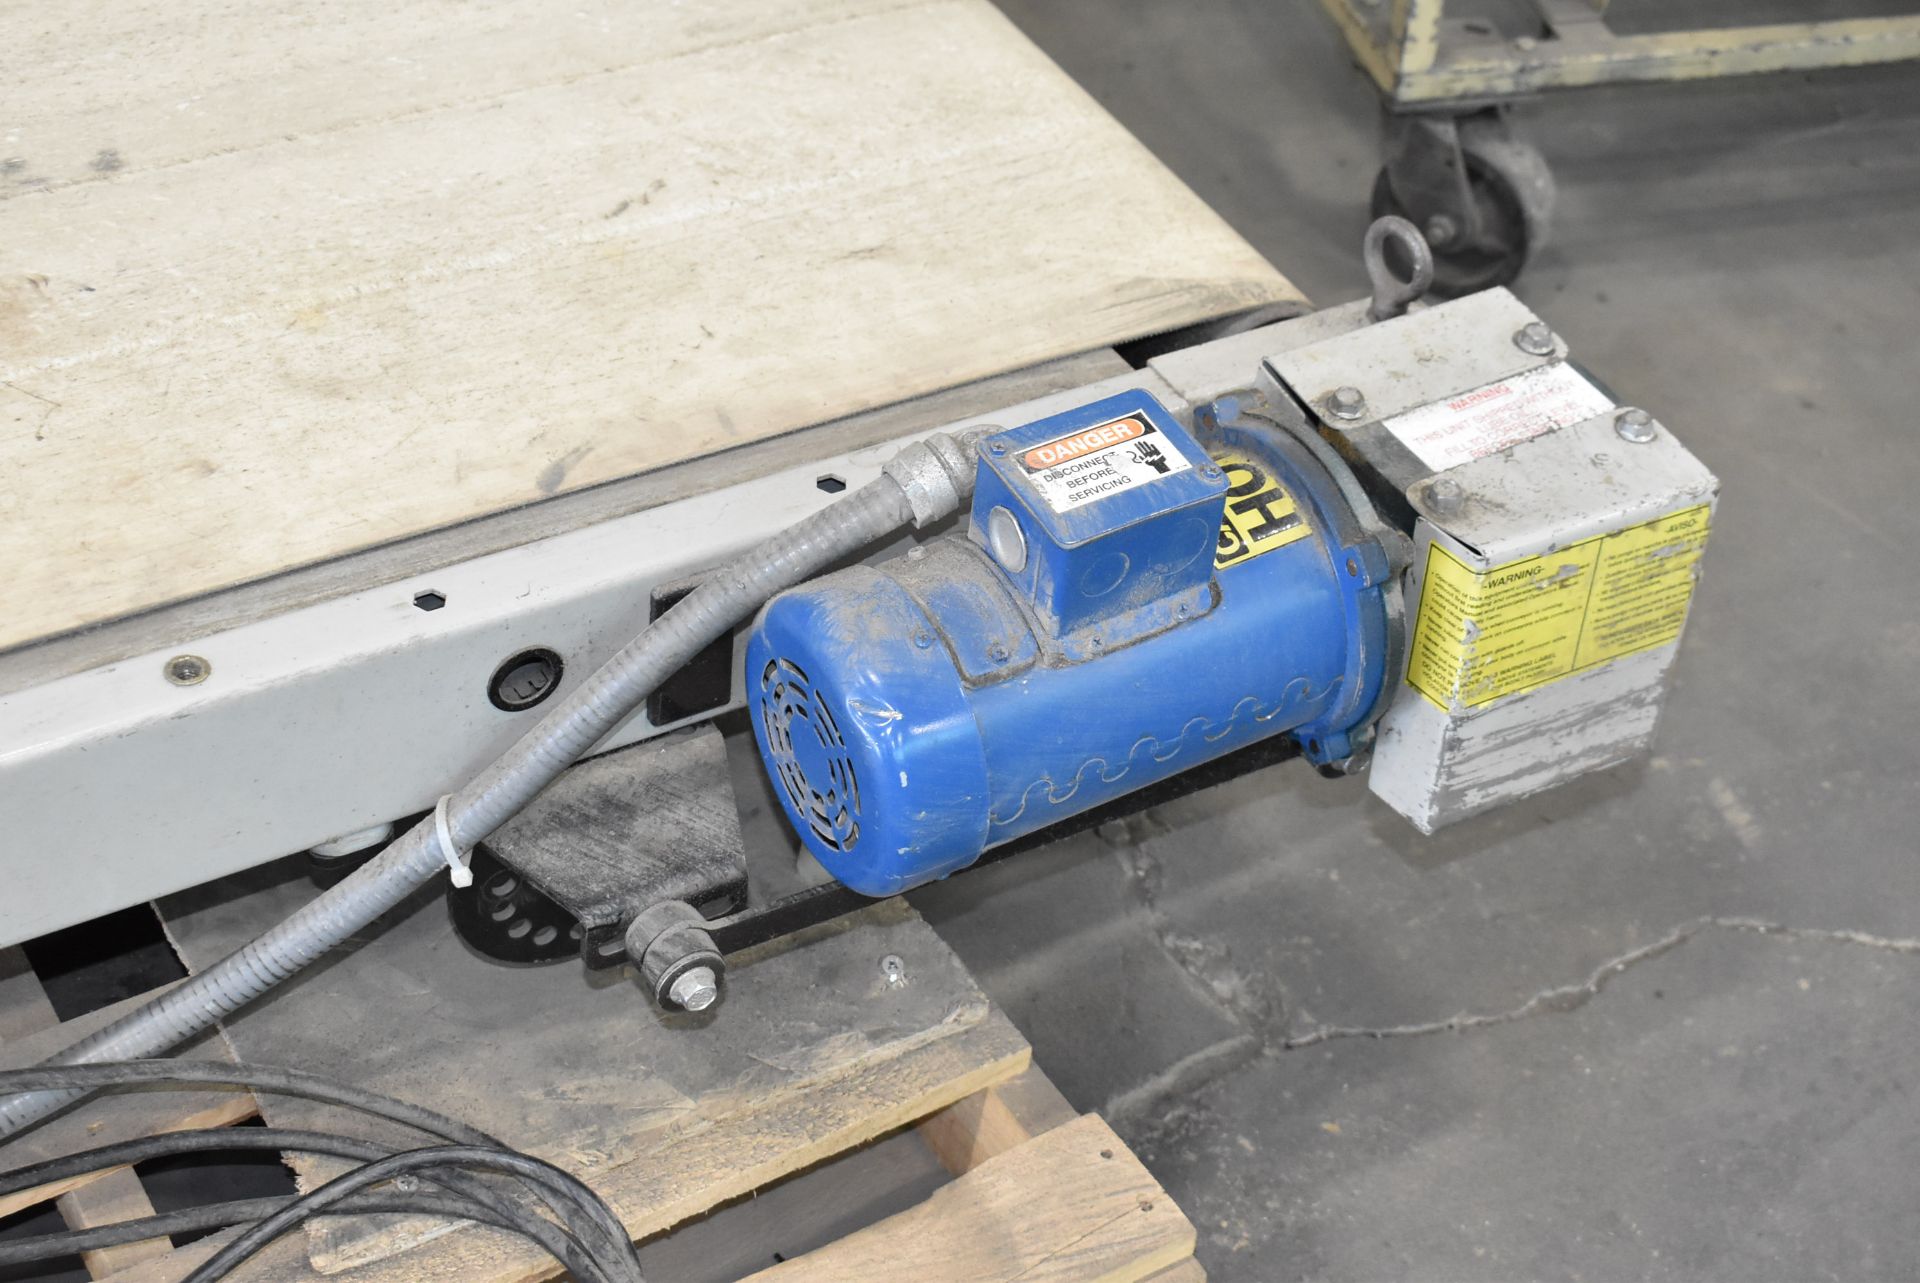 MFG UNKNOWN 72"X24" POWERED BELT CONVEYOR WITH PENTA KB POWER MULTI-DRIVE SPEED CONTROL - Image 3 of 4